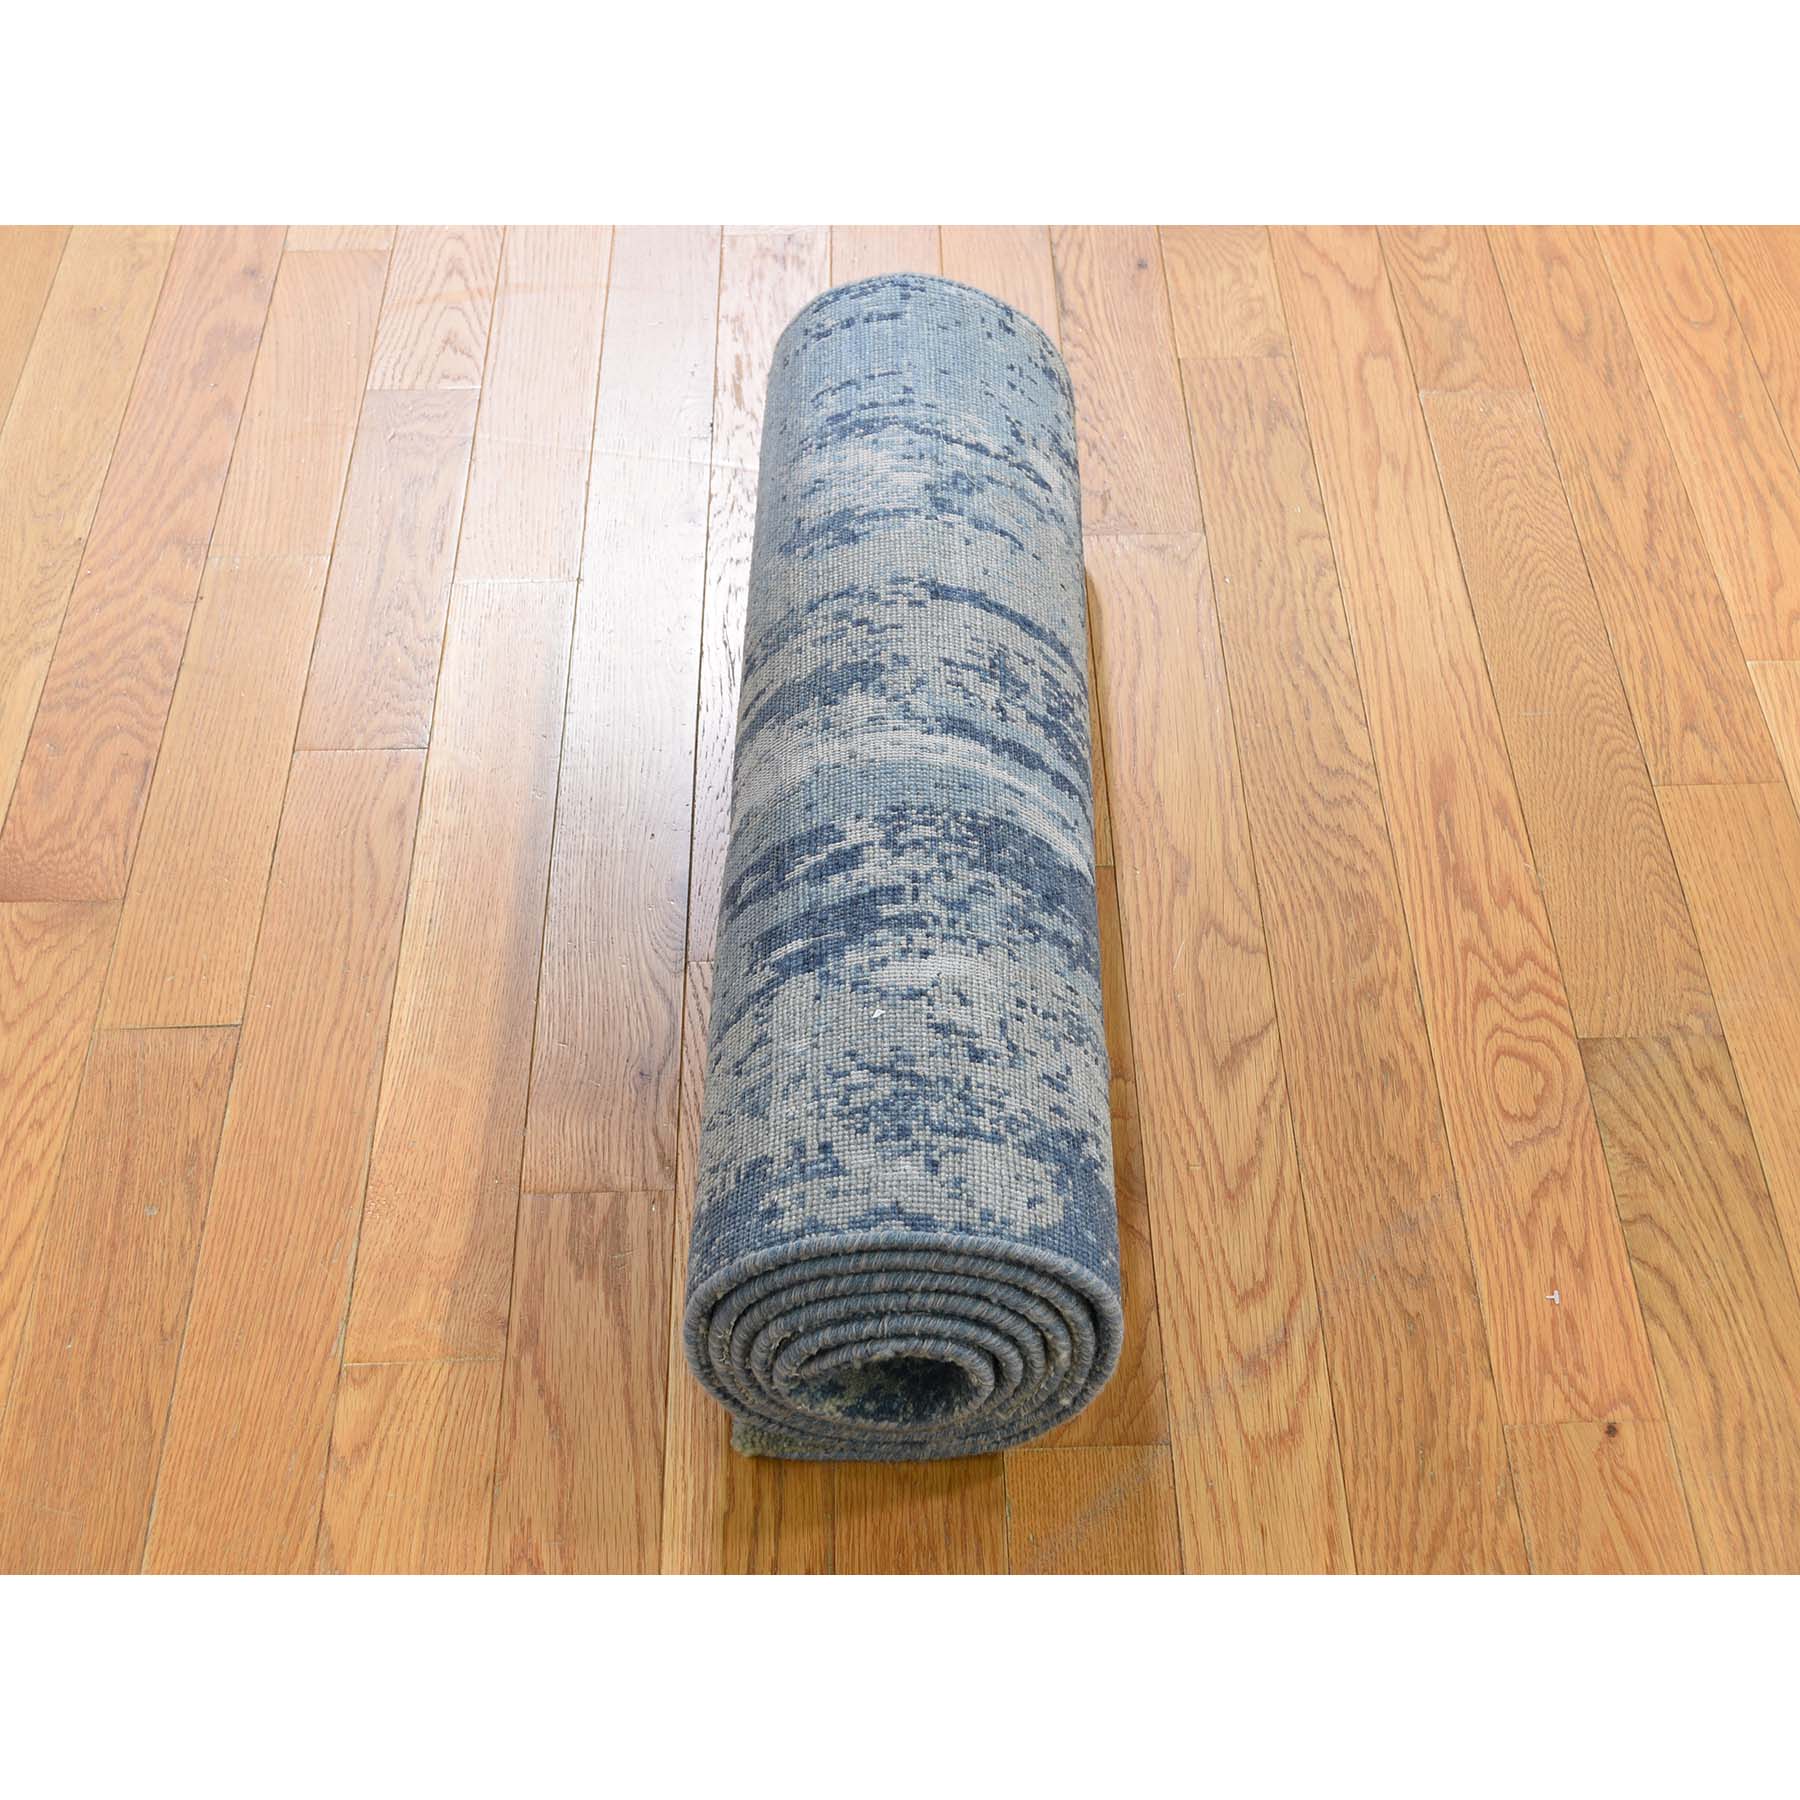 2-6 x8-3  Blue-Gray Abstract Design Wool and Pure Silk Hand-Knotted Oriental Runner Rug 